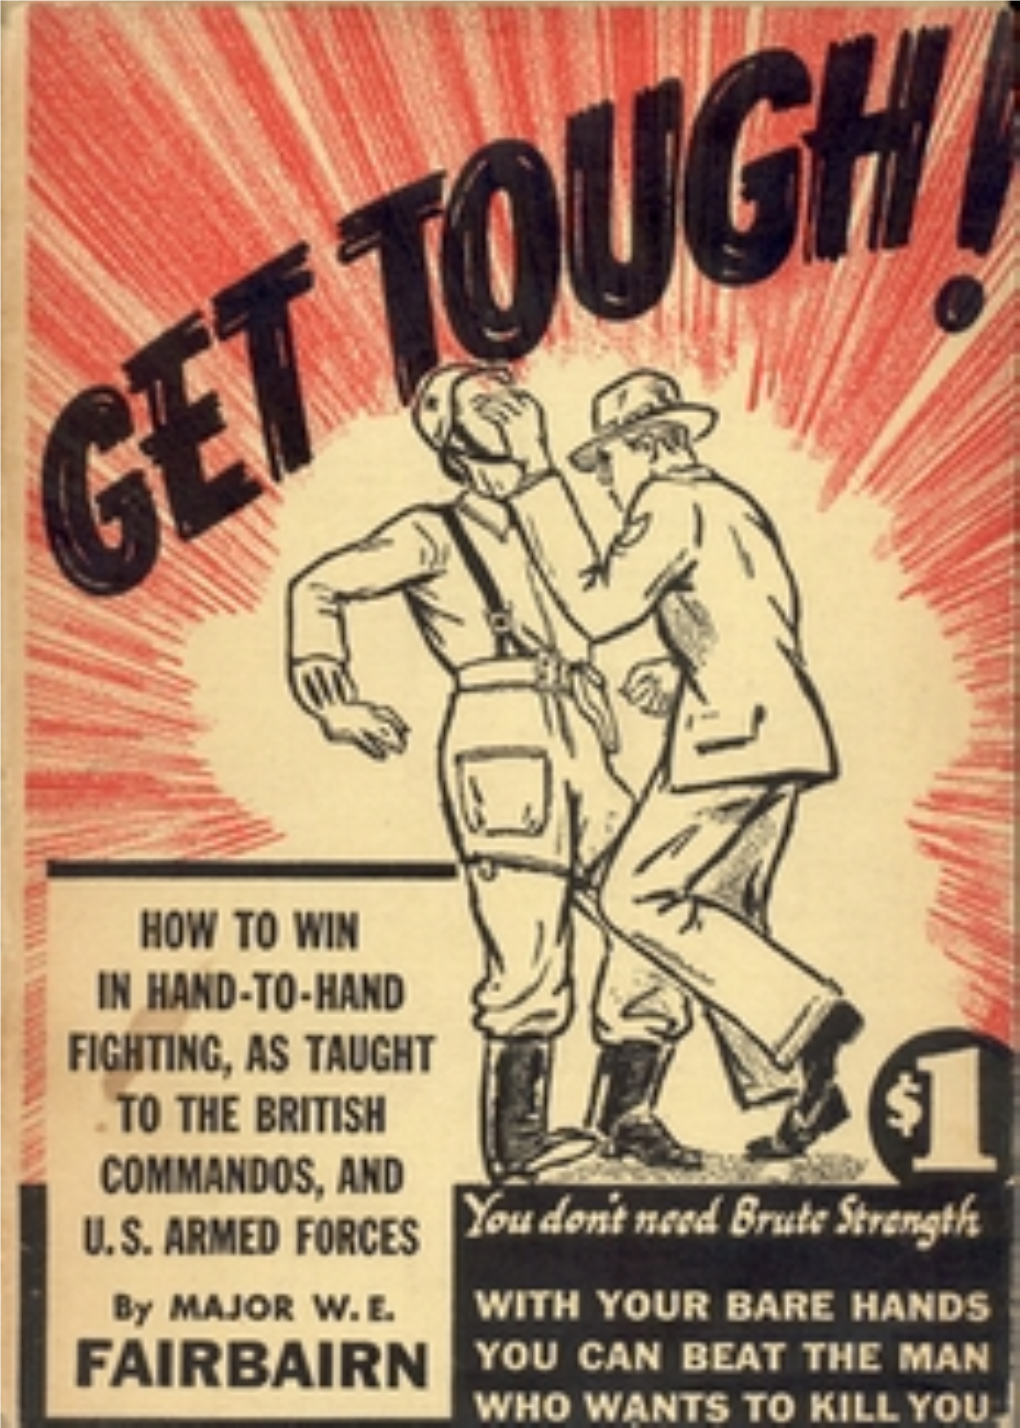 GET TOUGH! How to Win in Hand-To-Hand Fighting As Taught to the British Commandos and the U.S